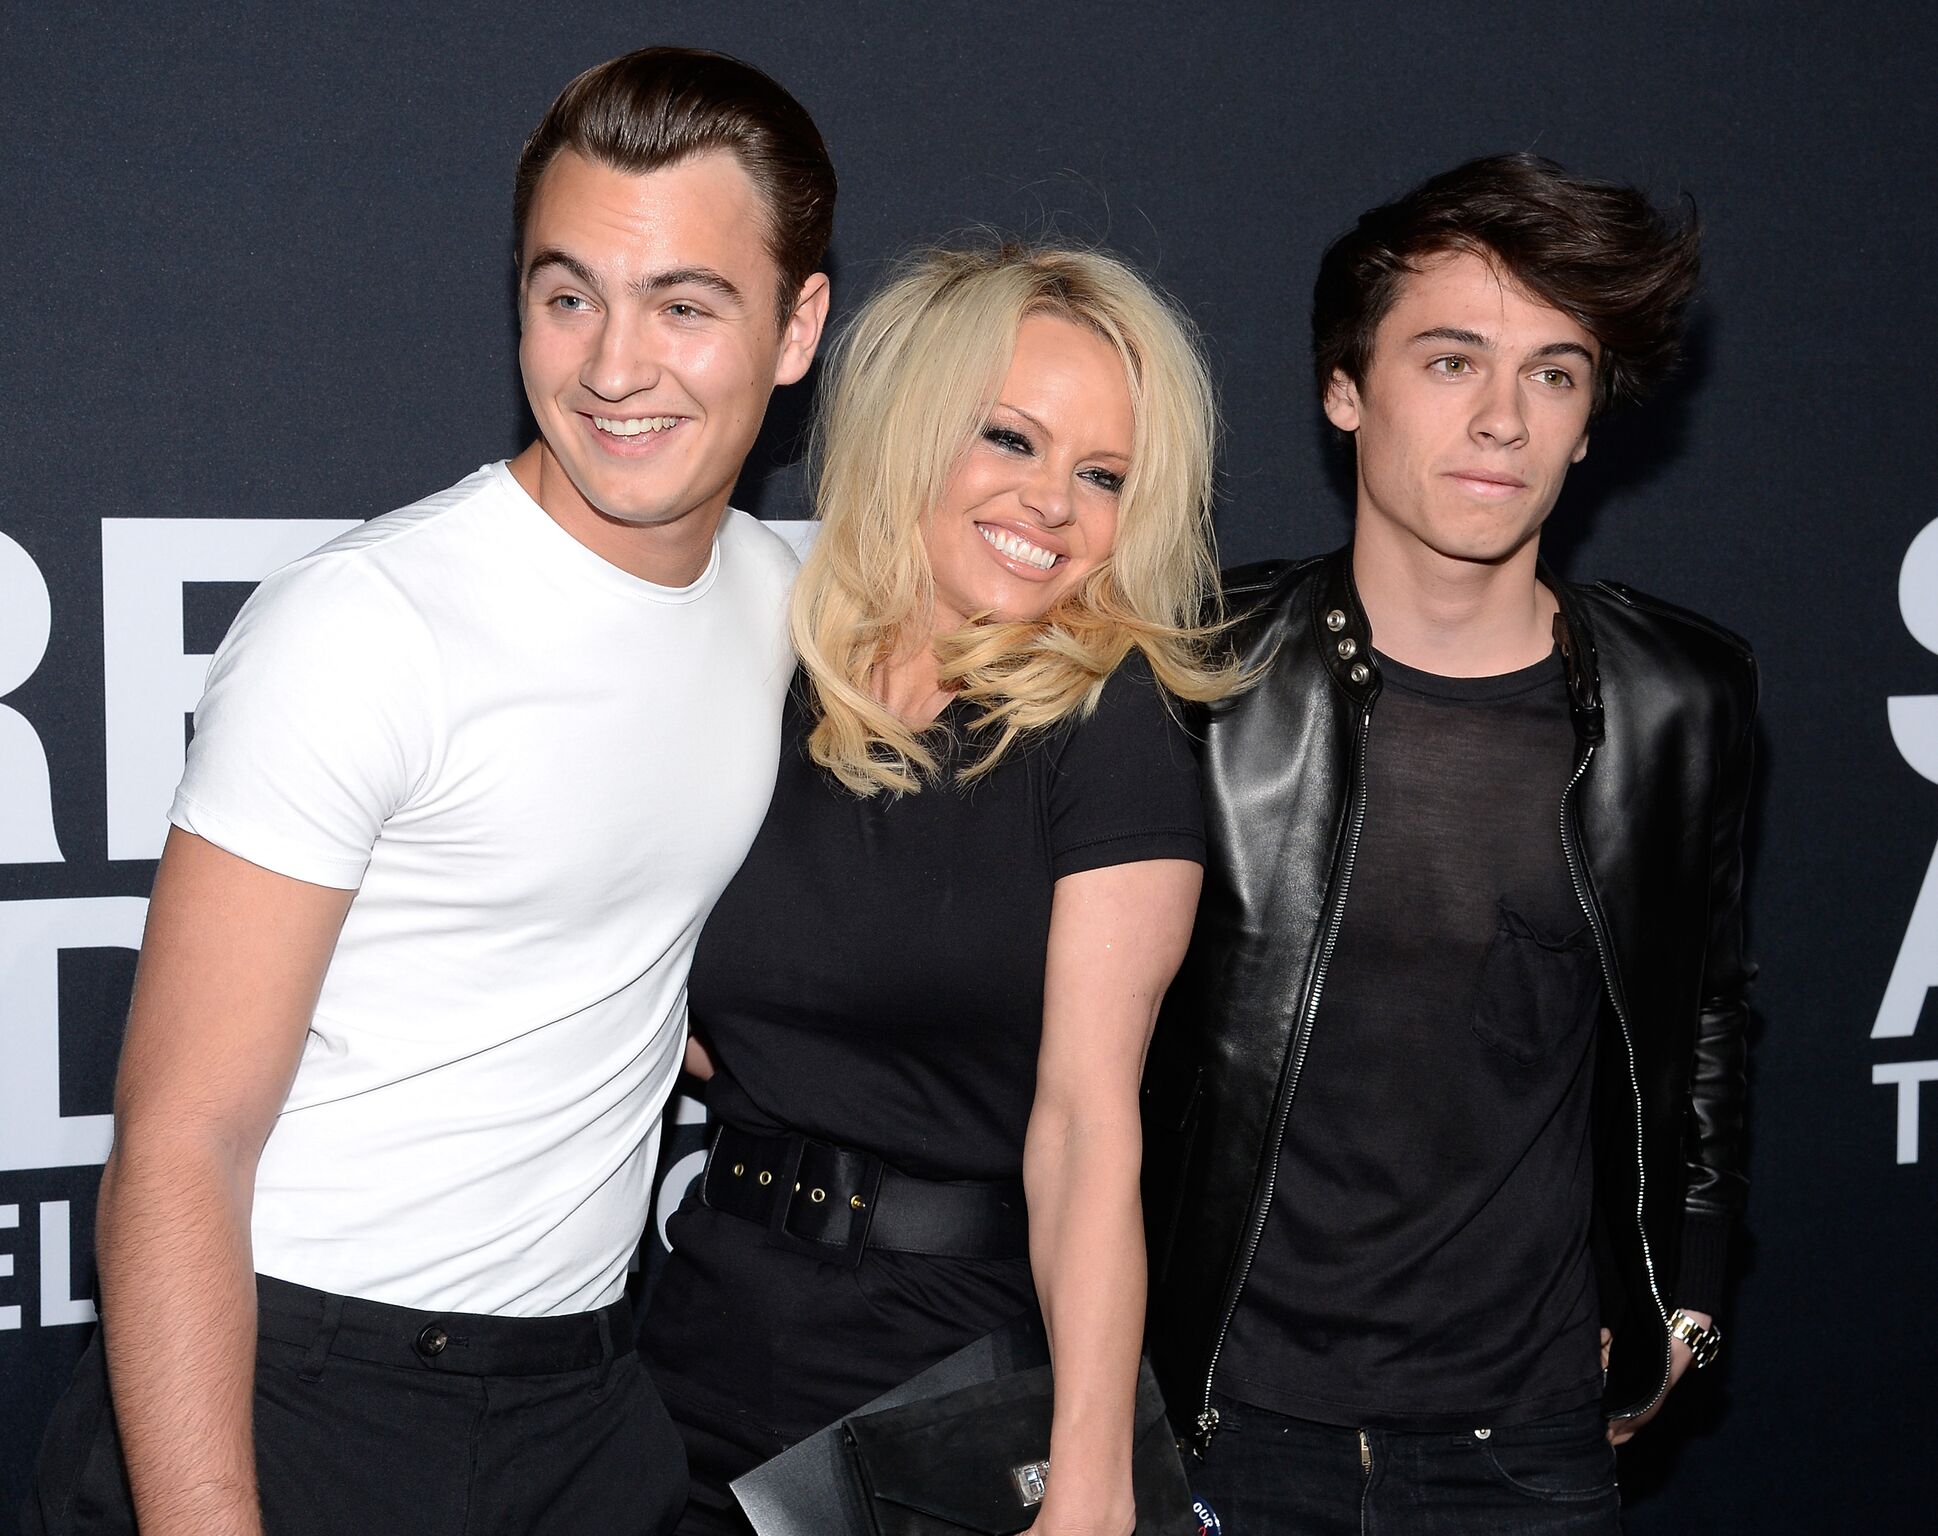  Actress Pamela Anderson (center) and her sons Brandon Lee (L) and Dylan Lee attend the Saint Laurent show | Getty Images